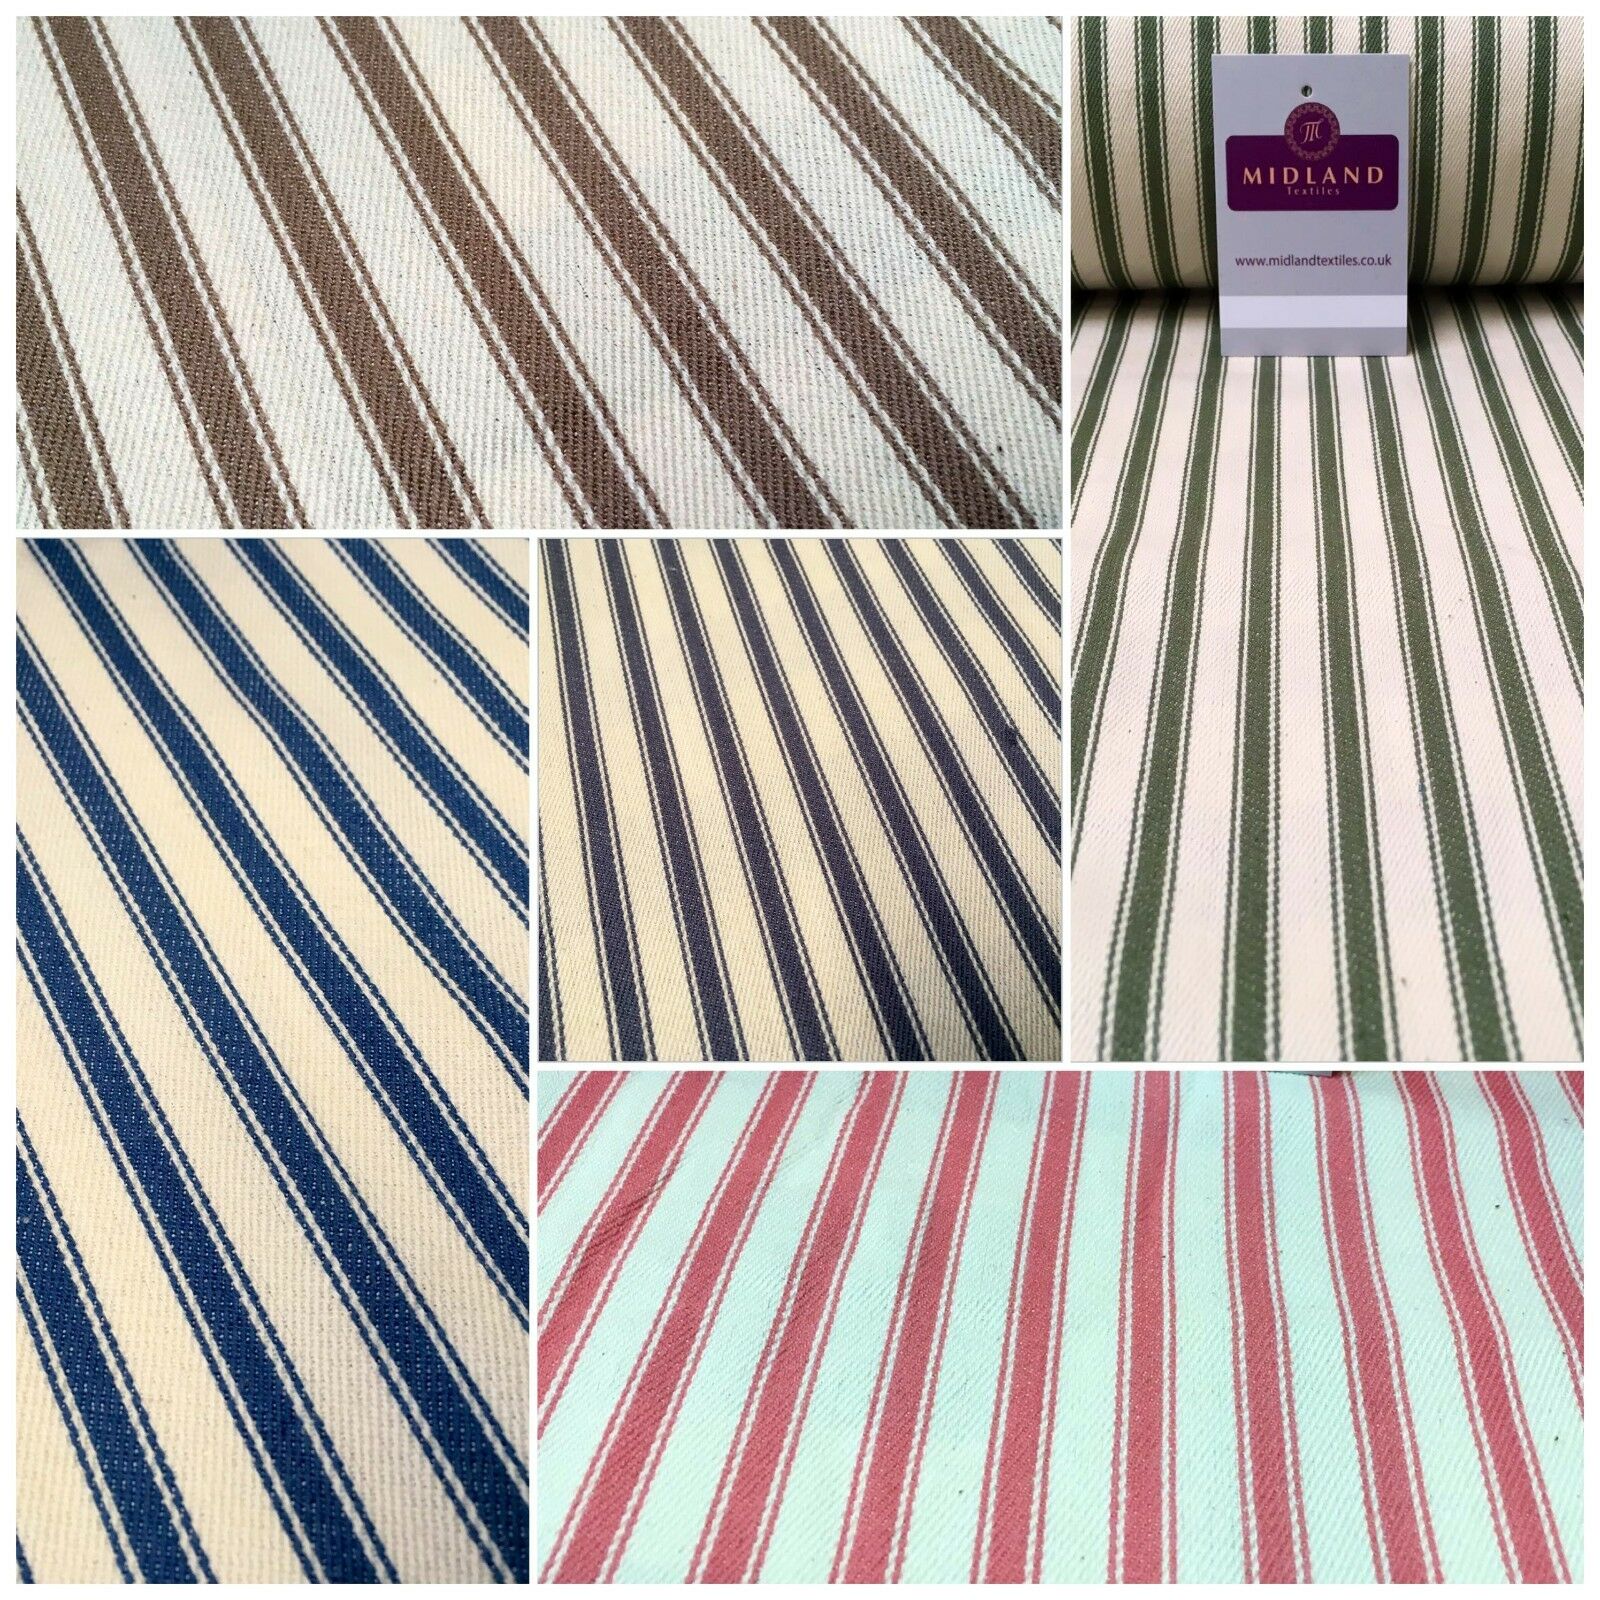 100% Cotton Canvas Power Loom 8mm Ticking Stripe fabric 54" Wide M1040 Mtex - a durable, versatile, and stylish fabric that's perfect for a variety of home décor projects.